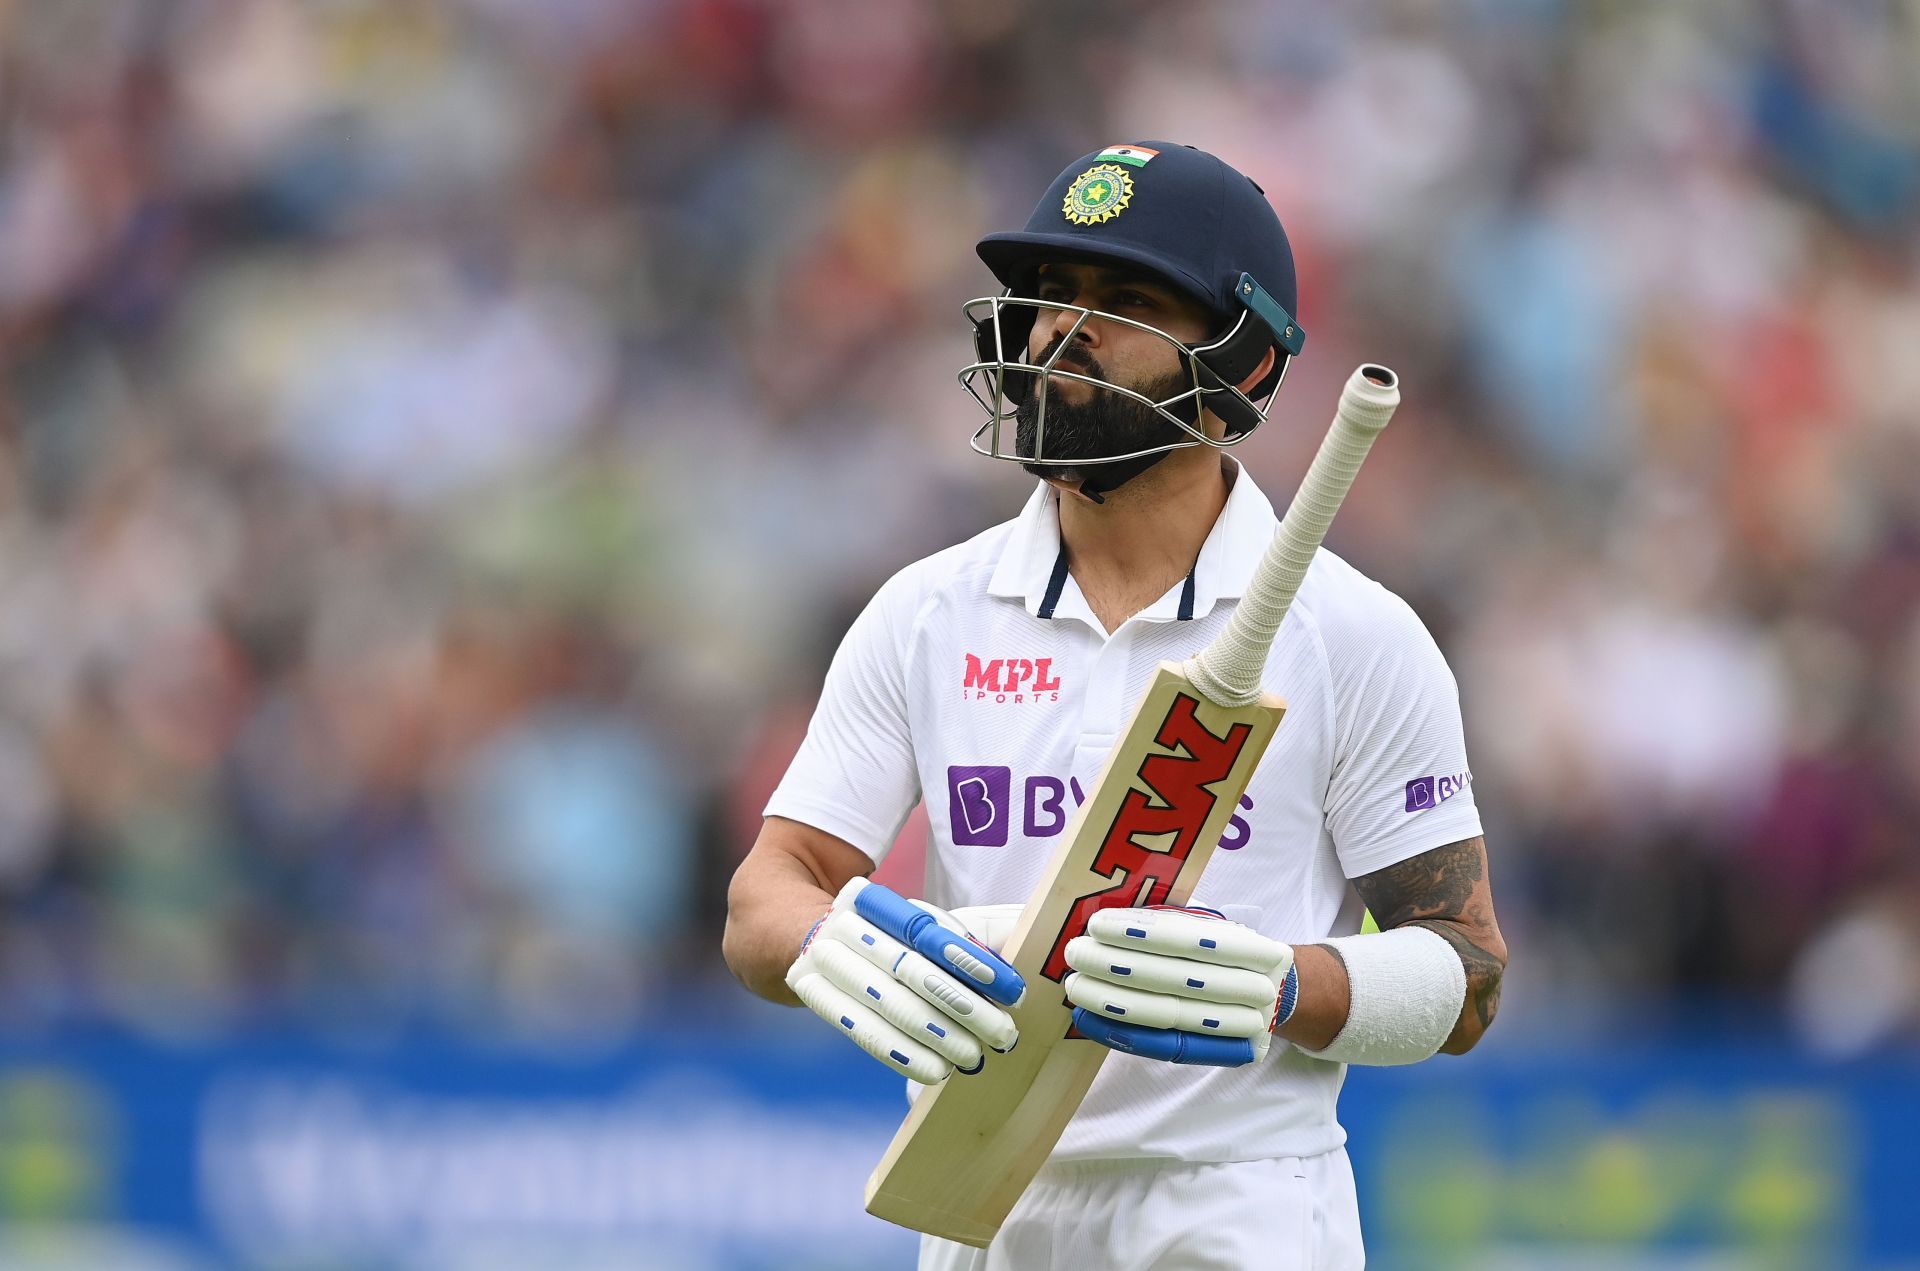 Virat Kohli had scores of 11 and 20 in the rescheduled fifth Test against England.